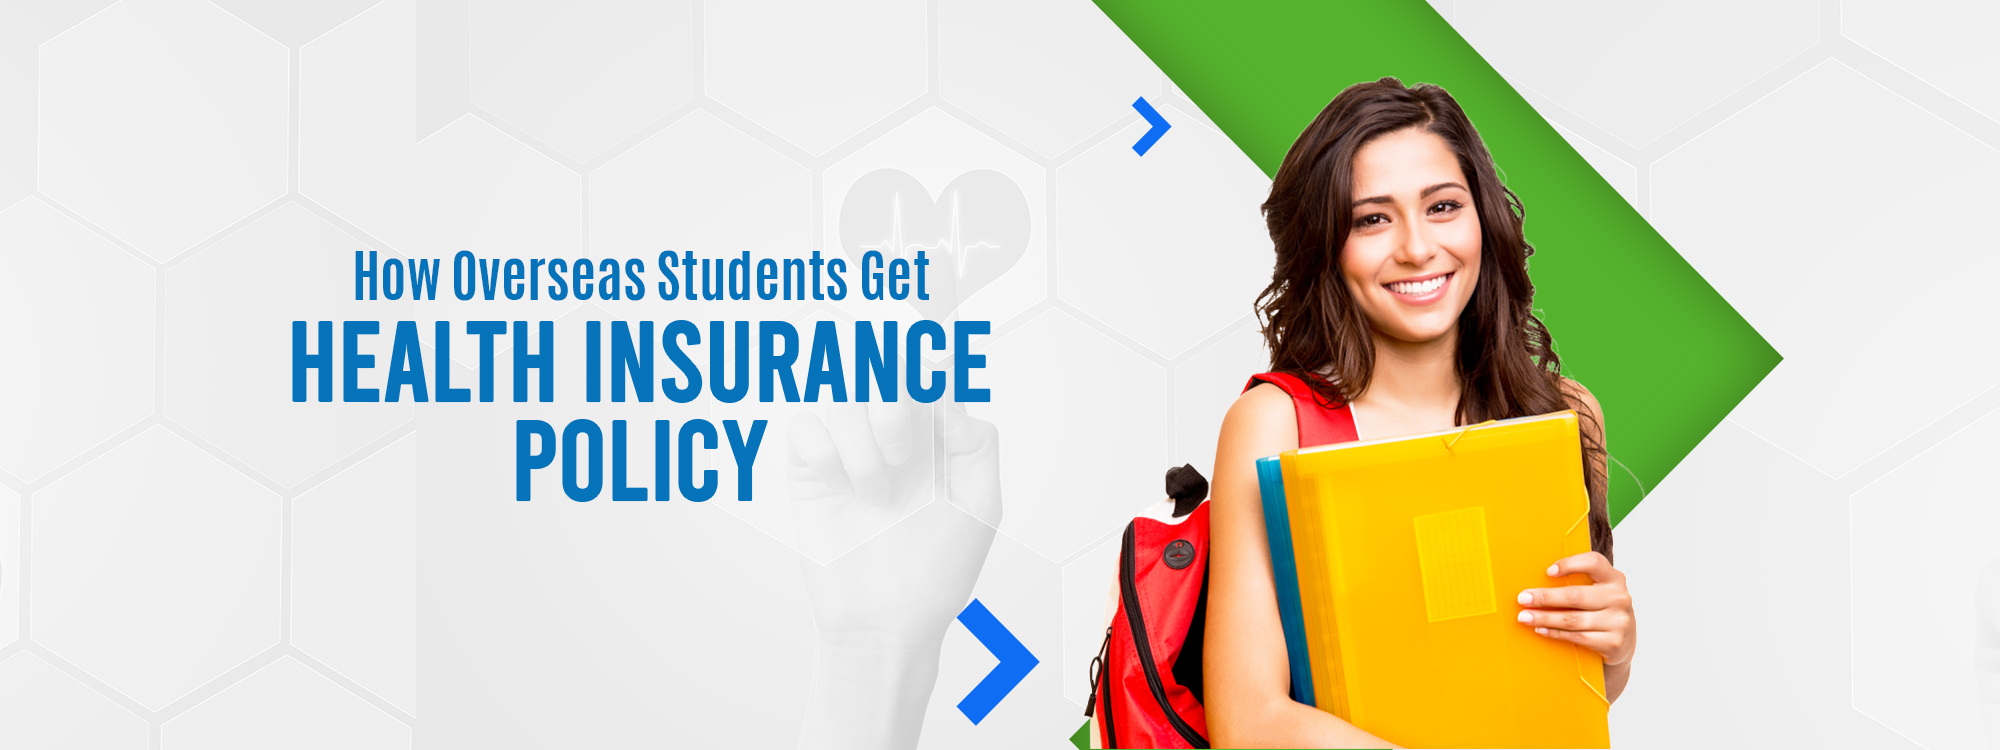 How Overseas Students Get Health Insurance Policy